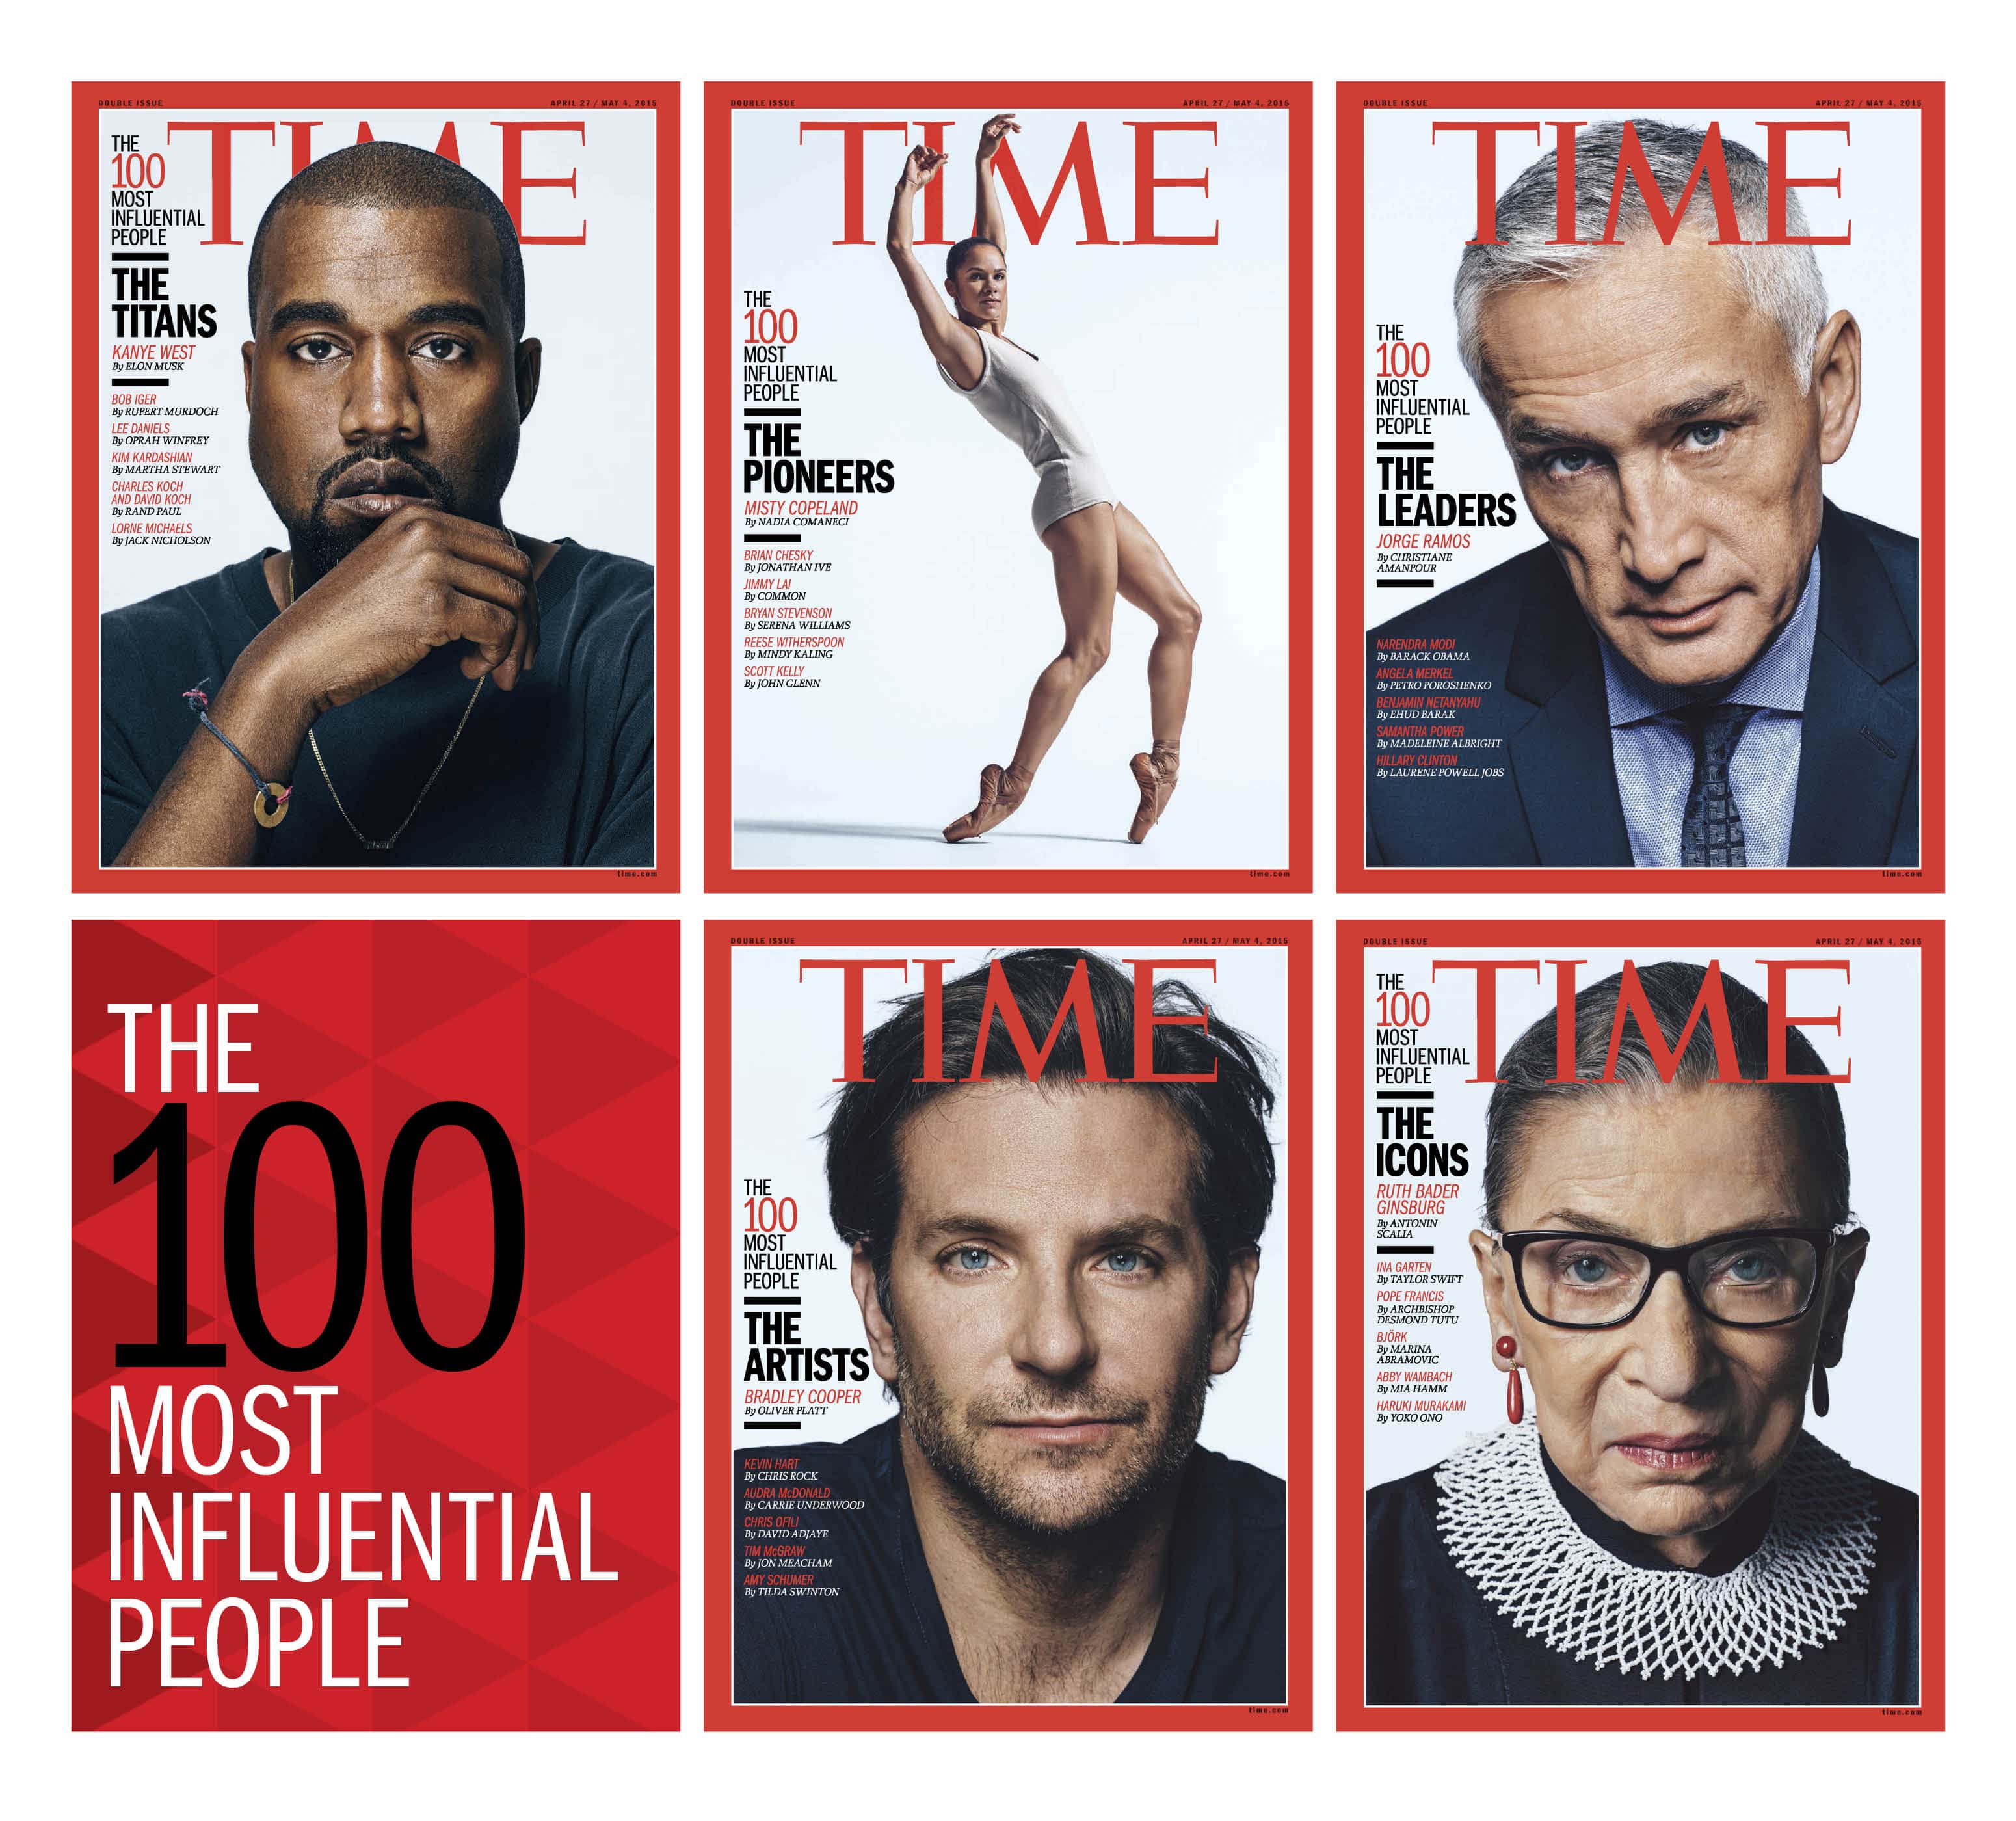 TIME's unveiled its annual list of the “100 Most Influential People